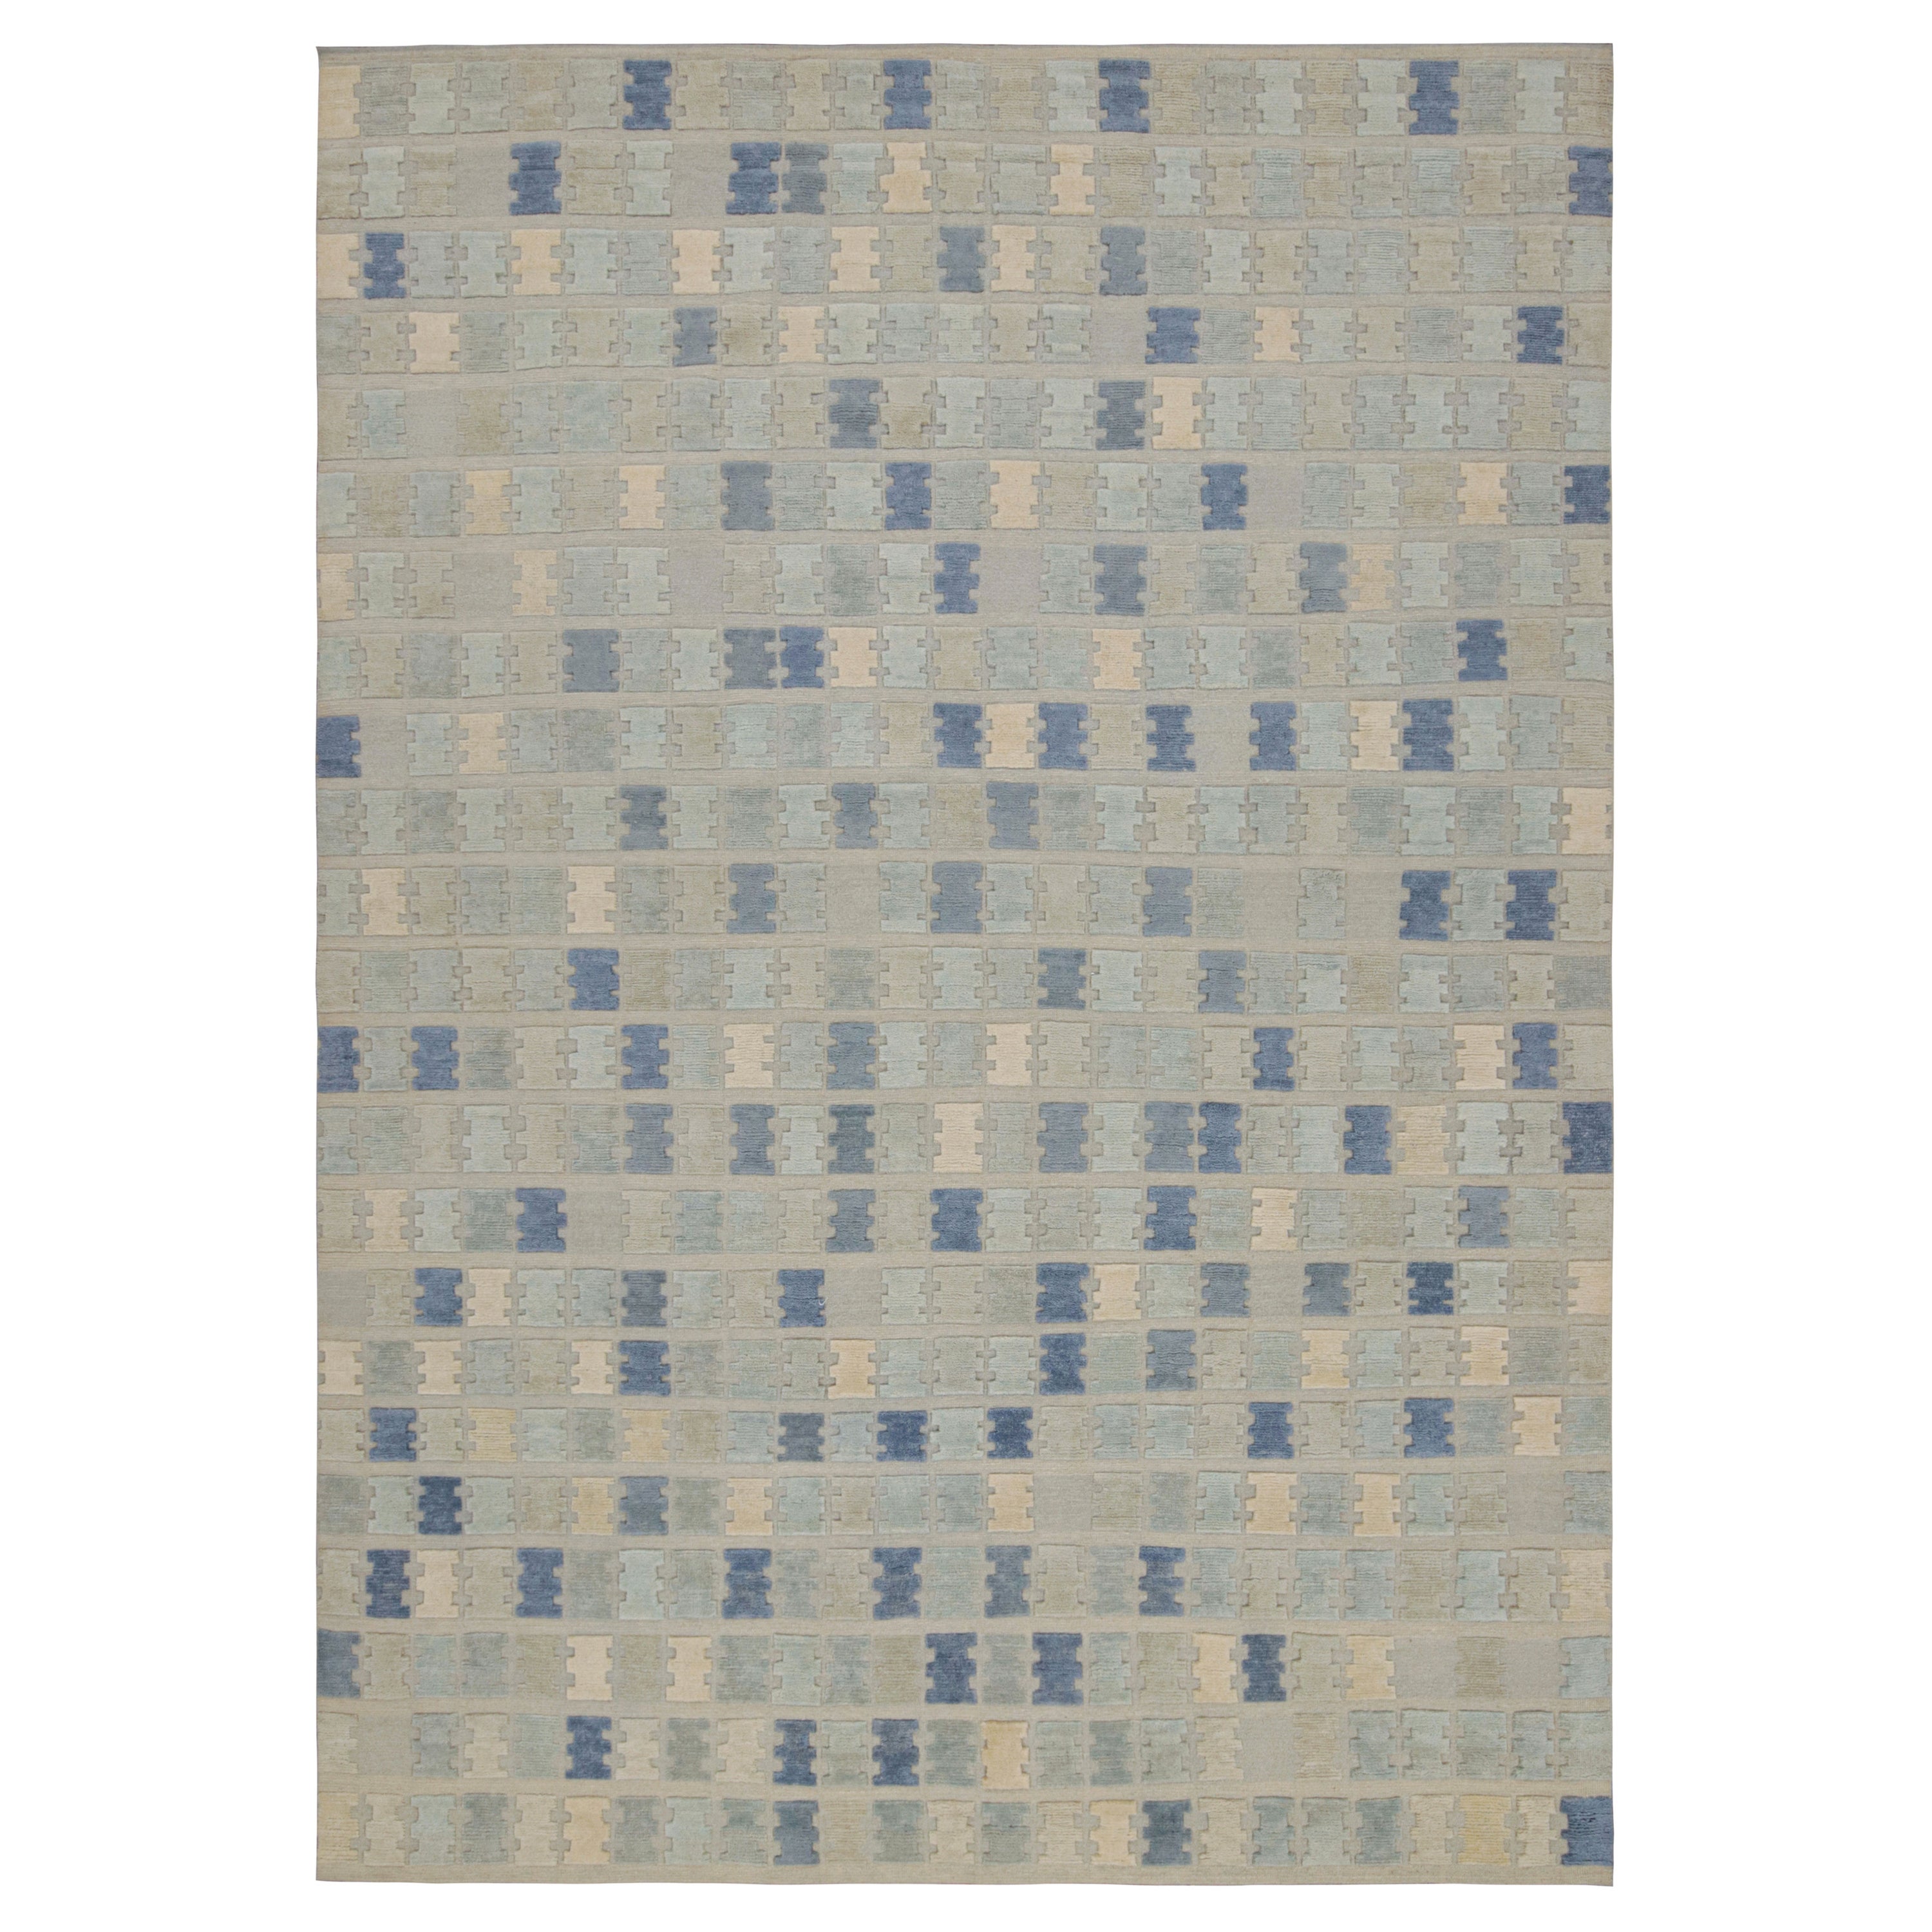 Rug & Kilim’s “High” Scandinavian Style Rug with Light Blue Geometric Patterns For Sale